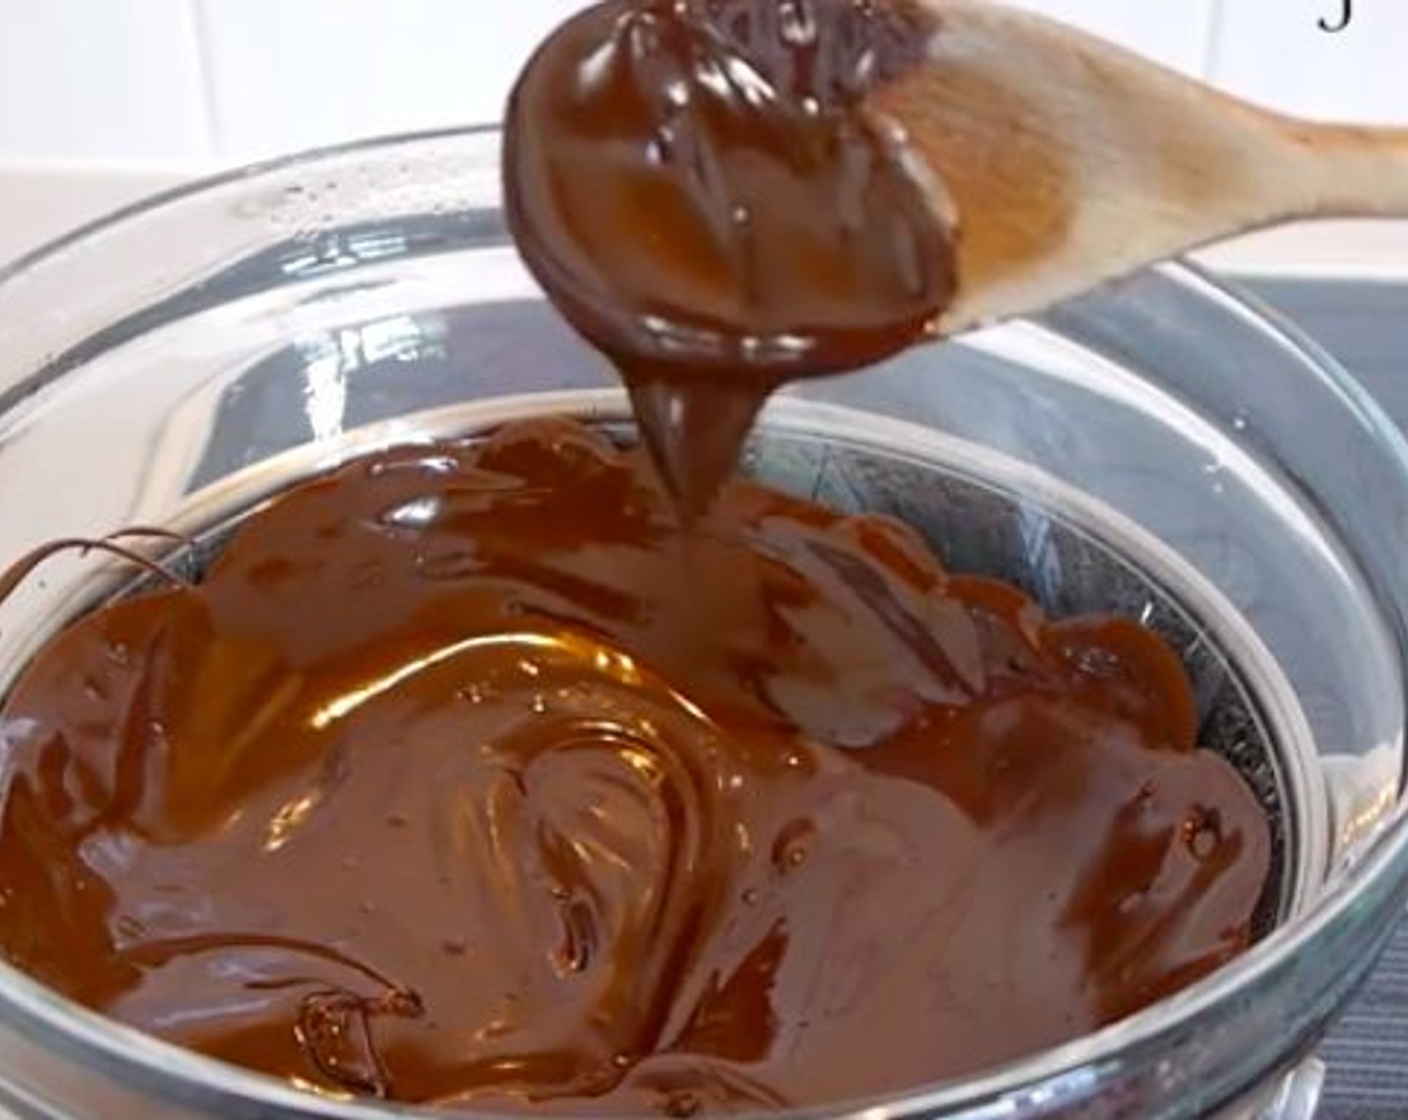 step 1 Melt the 70% Dark Chocolate (1 cup) and Unsalted Butter (2 Tbsp) in a bowl over boiling water. When melted set aside to cool down.